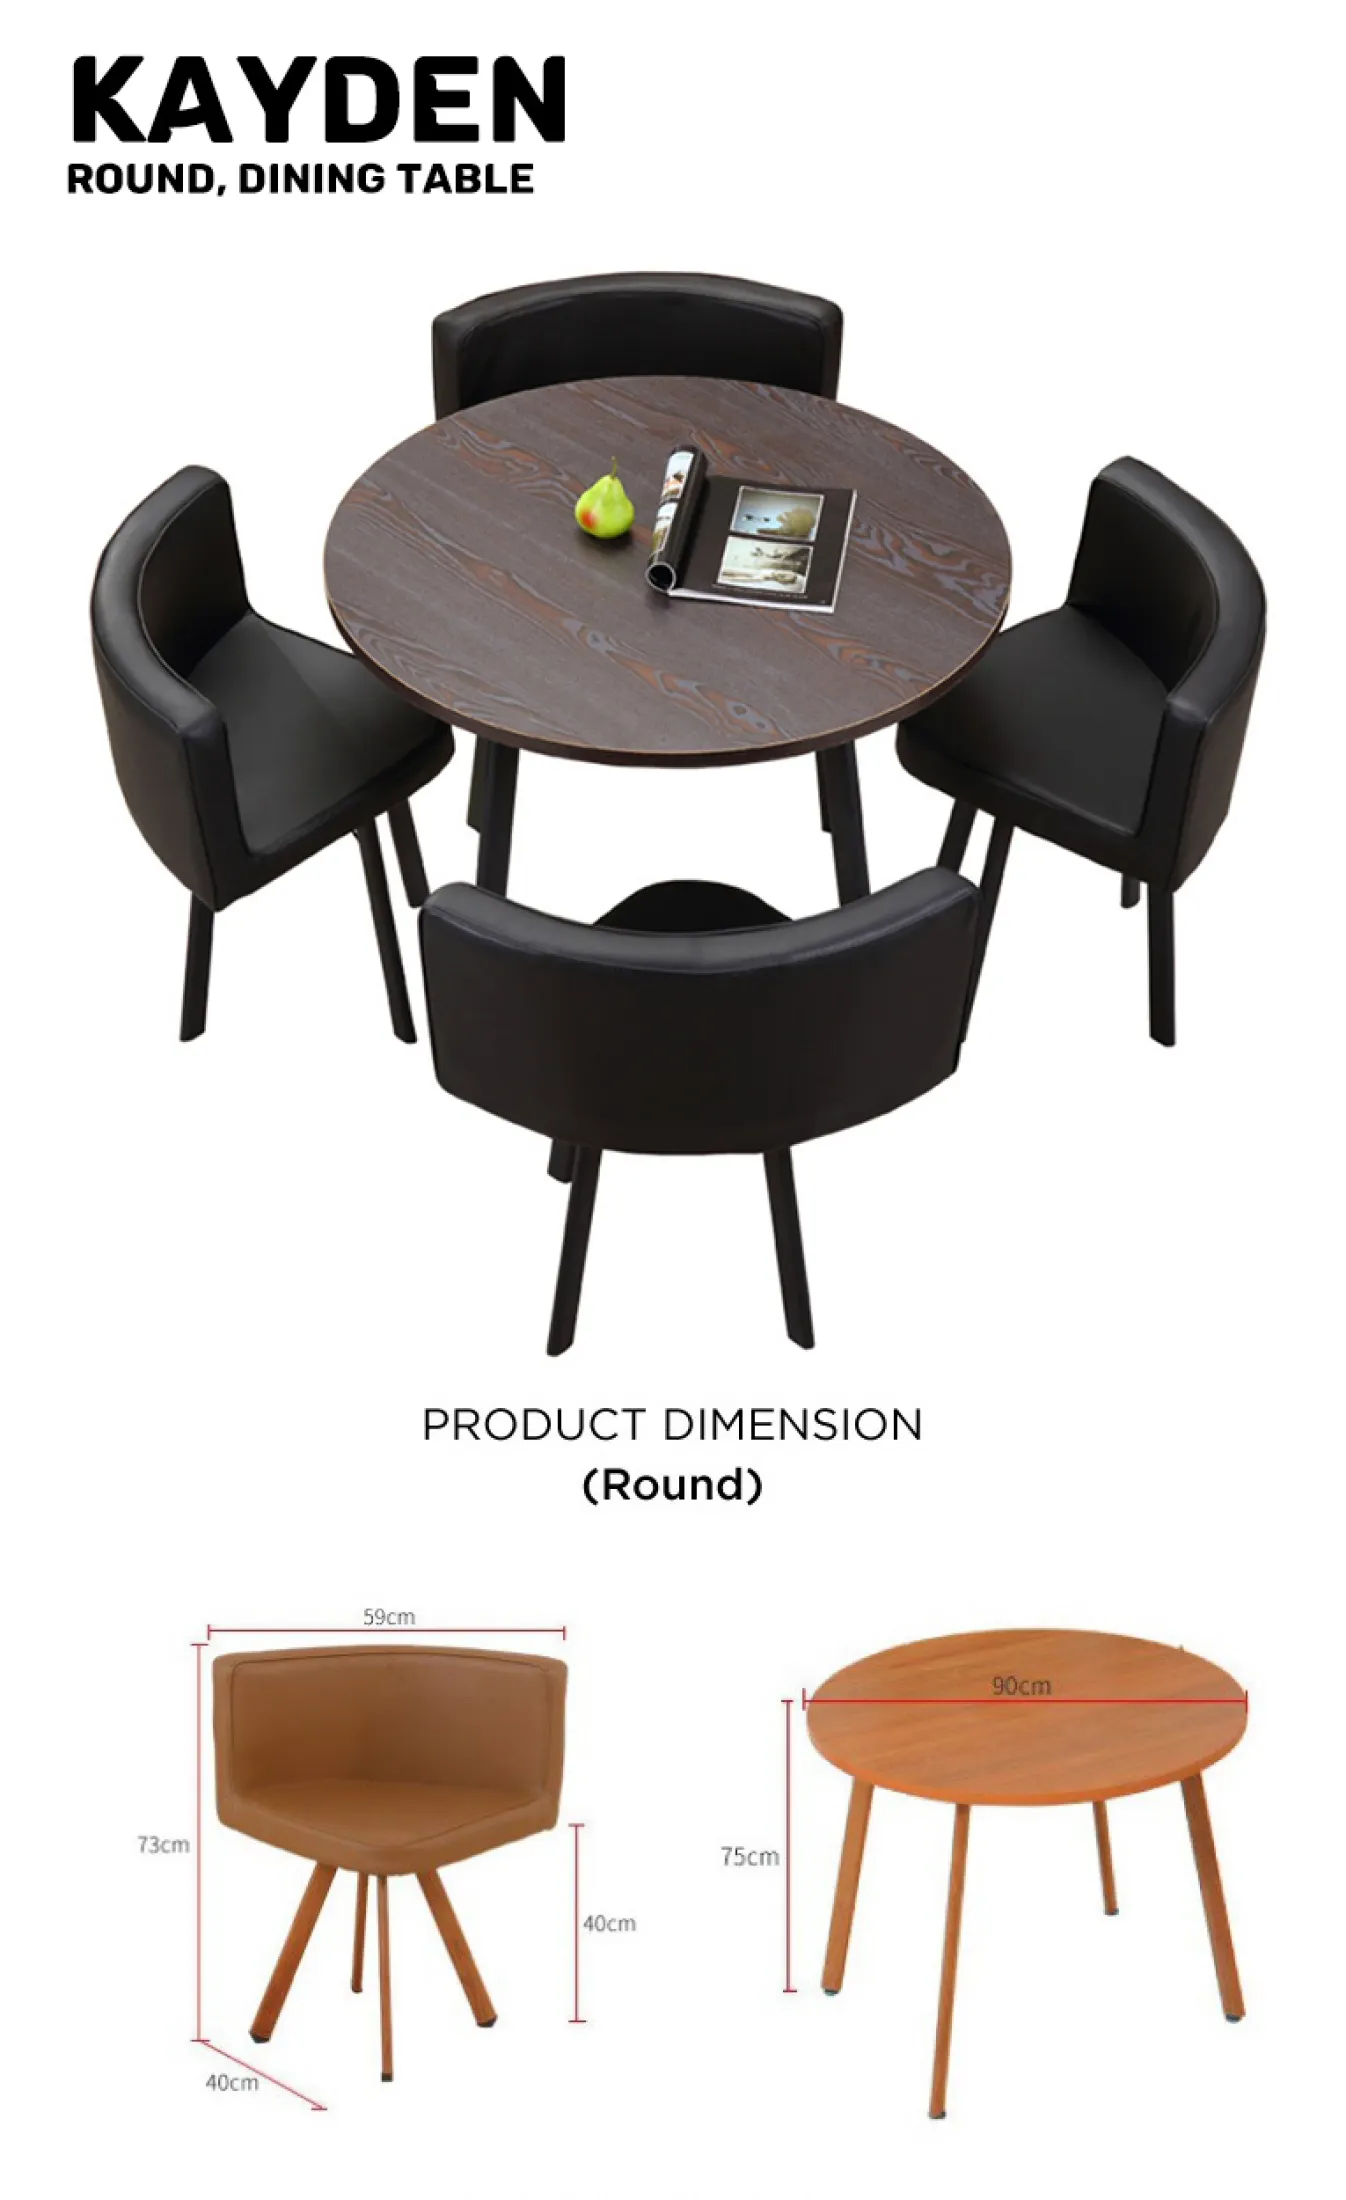 Bulky Kaiden Round Dining Table Set 1, Round Dining Table With Leather Seats